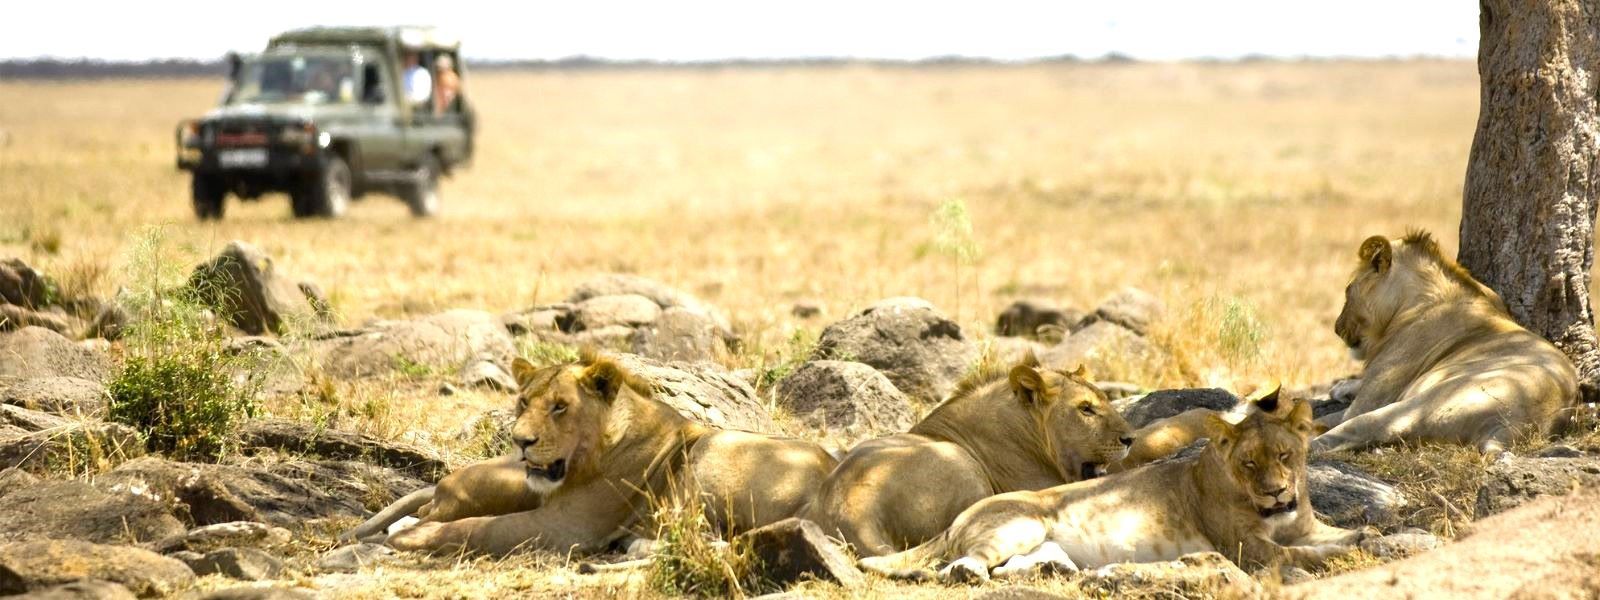 A group of people on a safari spot a pride of lions resting in Kenya.